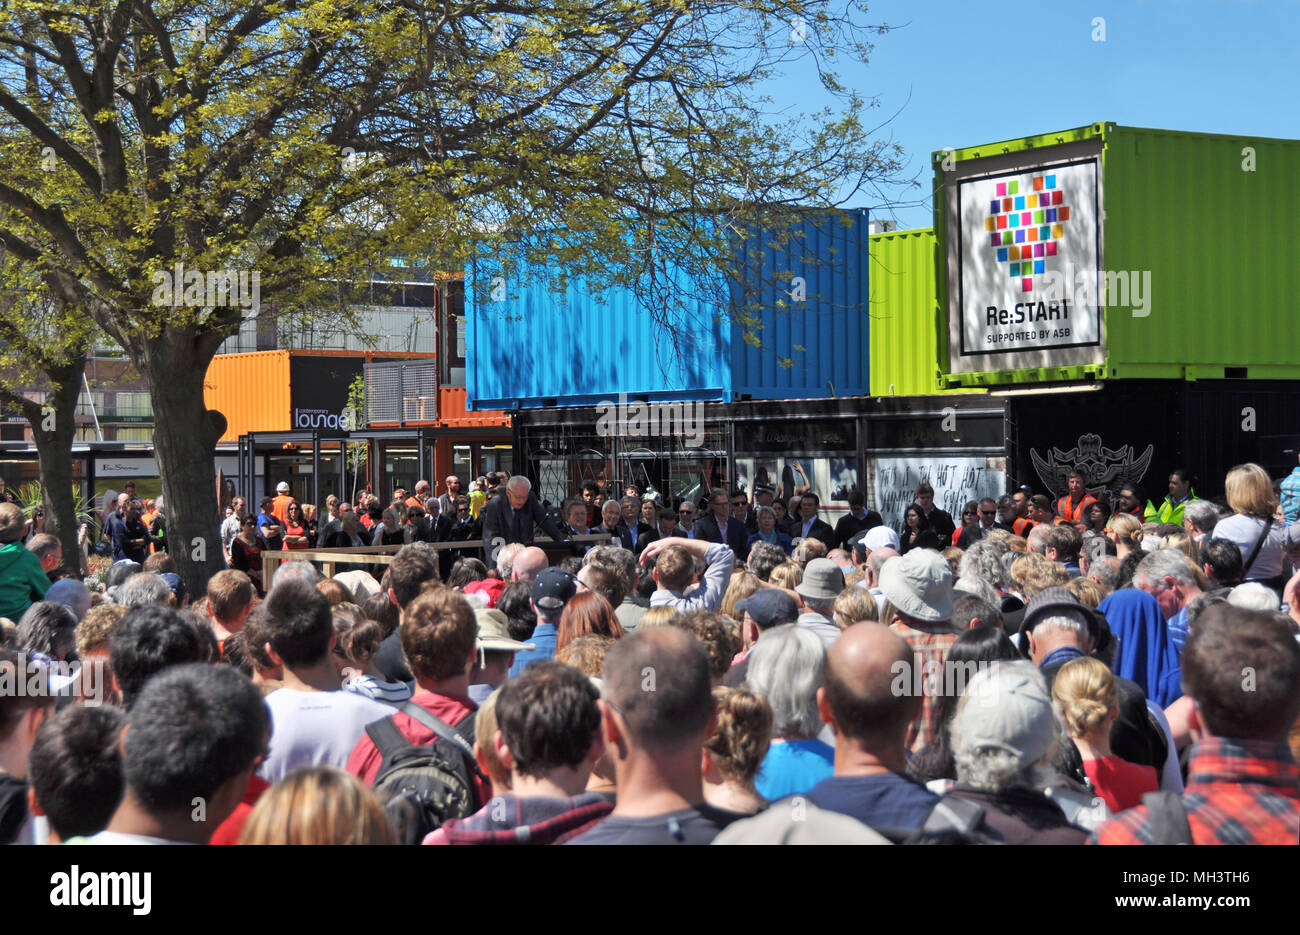 Christchurch, New Zealand - October 29, 2017: Opening Ceremony for the Heart Start campaign to ressurect the centre of Christchurch retail sector afte Stock Photo